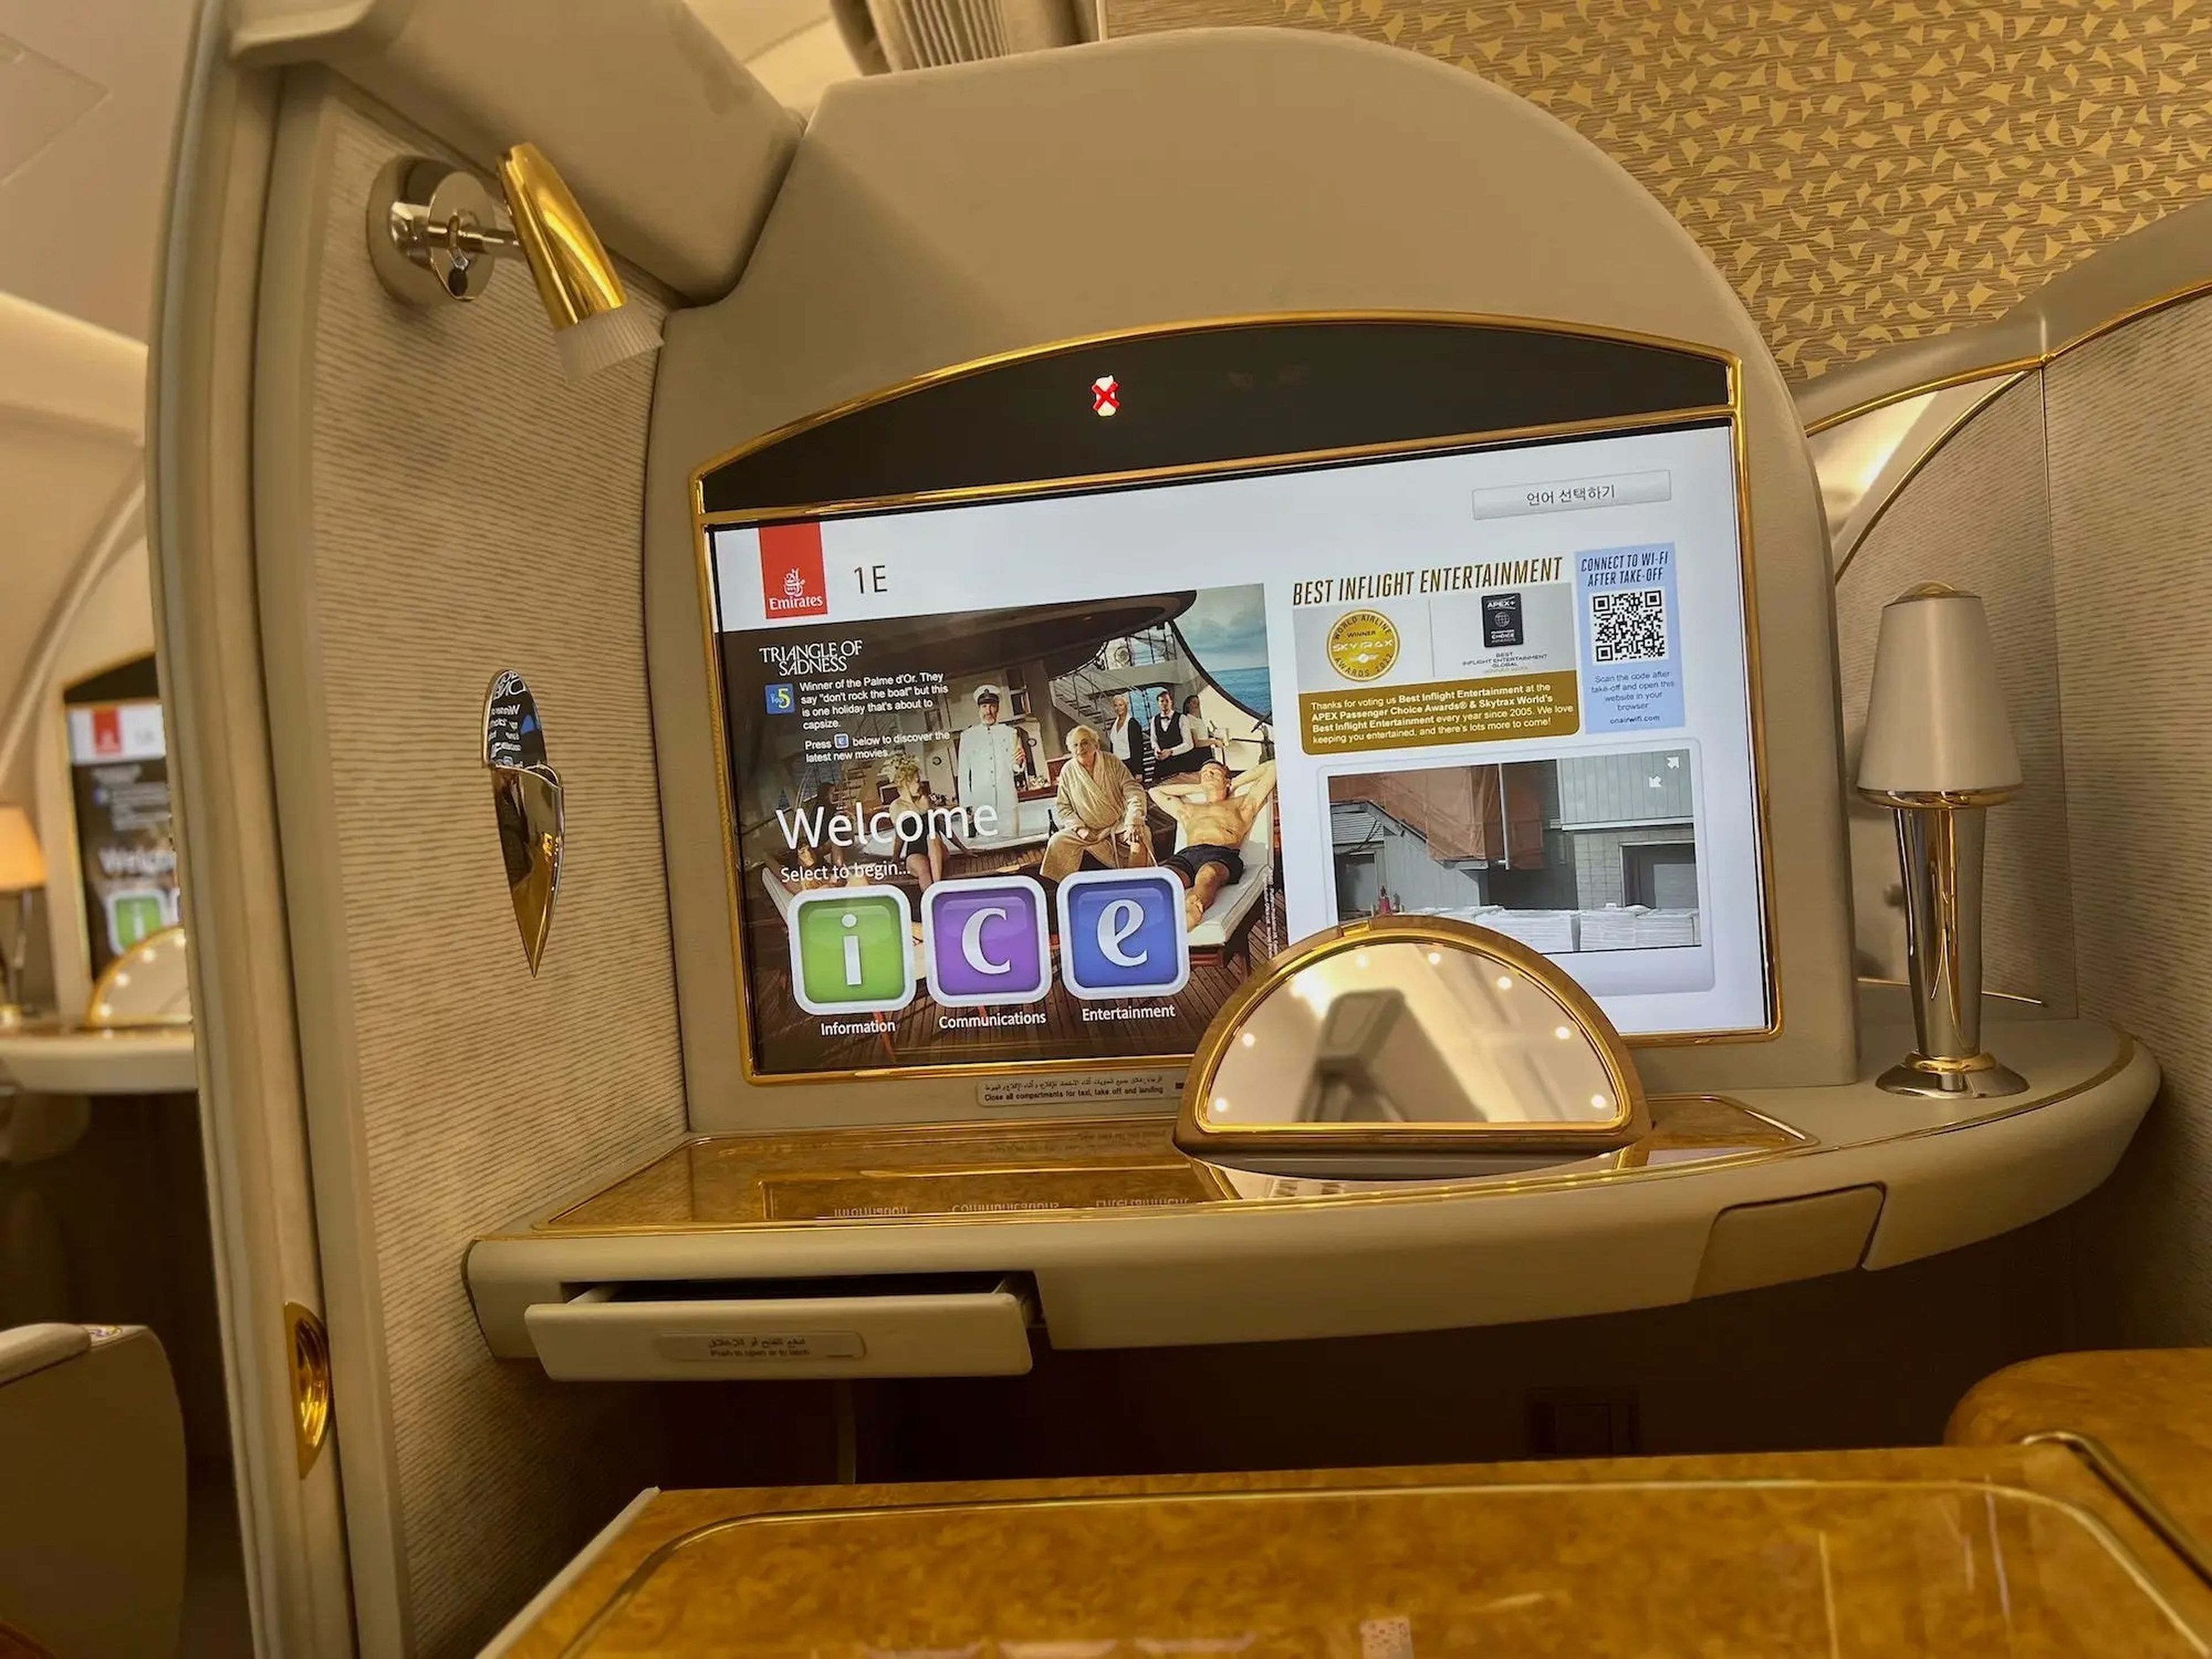 Emirates A380 first class suite.